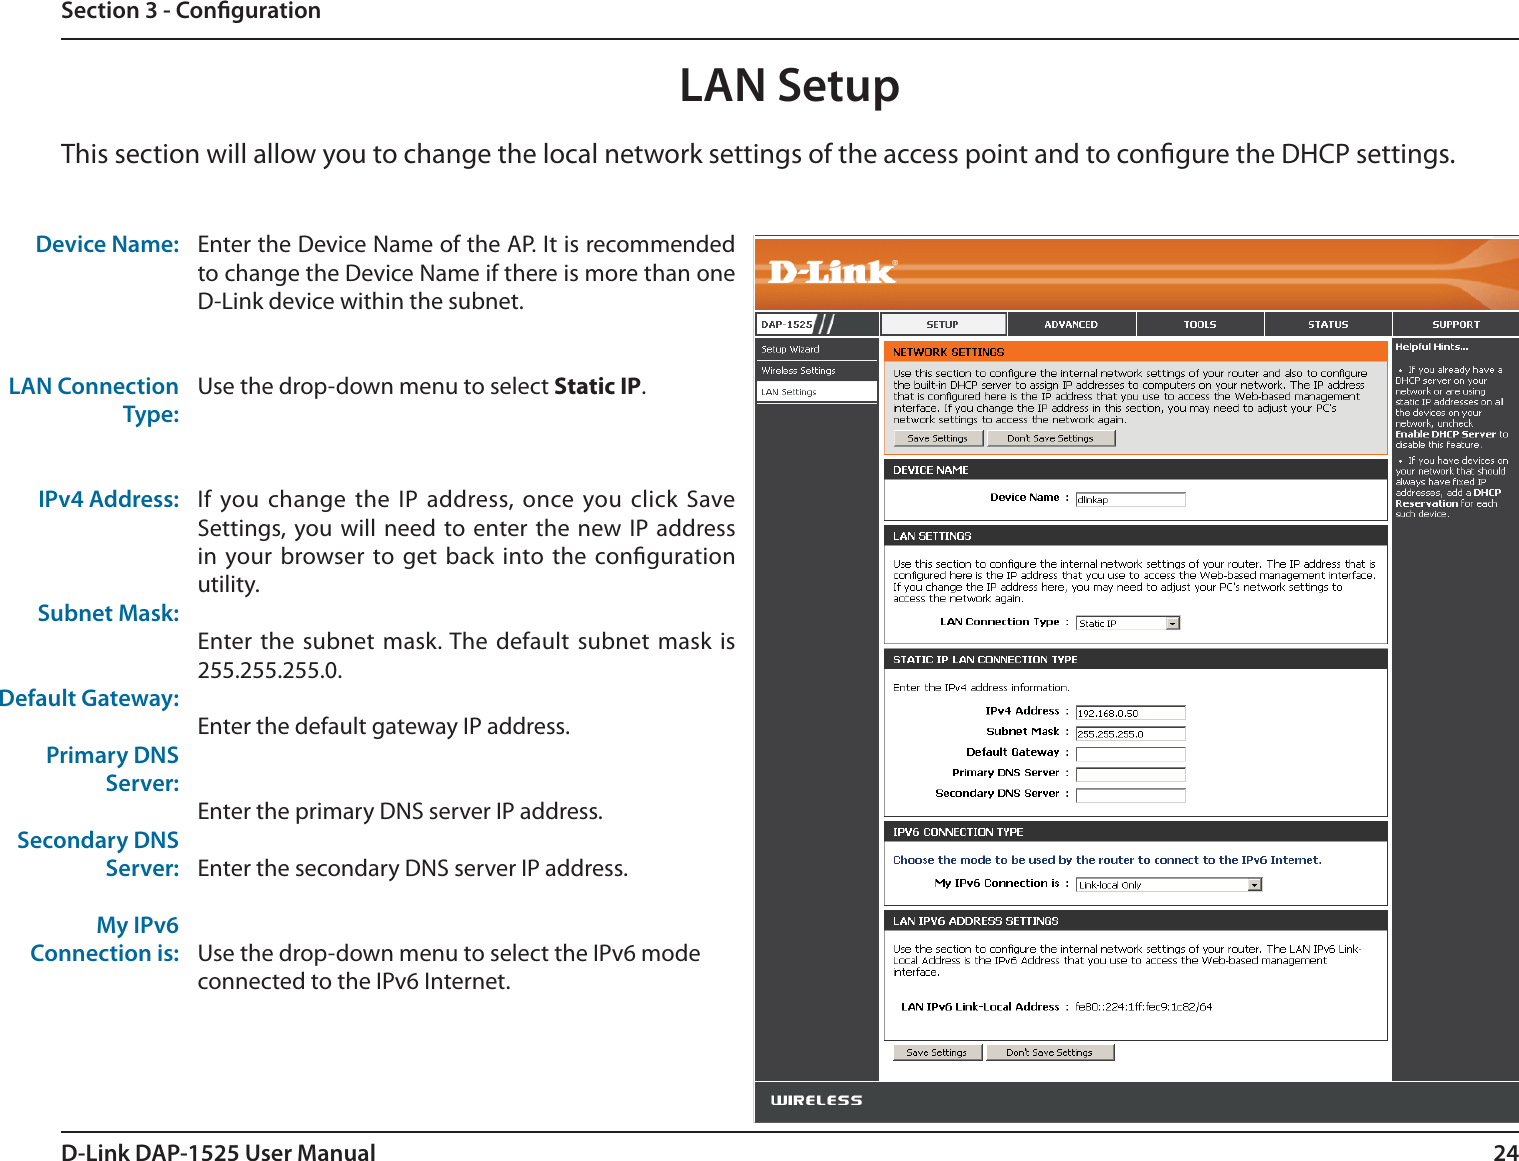 24D-Link DAP-1525 User ManualSection 3 - CongurationDevice Name:LAN Connection Type:IPv4 Address:Subnet Mask:Default Gateway:Primary DNSServer:Secondary DNSServer:My IPv6Connection is:Enter the Device Name of the AP. It is recommended to change the Device Name if there is more than one D-Link device within the subnet.Use the drop-down menu to select Static IP.If you change the IP address, once you click Save Settings, you will need to enter the new IP address in your browser to get back into the conguration utility.Enter the subnet mask. The default subnet mask is 255.255.255.0.Enter the default gateway IP address.Enter the primary DNS server IP address.Enter the secondary DNS server IP address.Use the drop-down menu to select the IPv6 modeconnected to the IPv6 Internet.LAN SetupThis section will allow you to change the local network settings of the access point and to congure the DHCP settings.